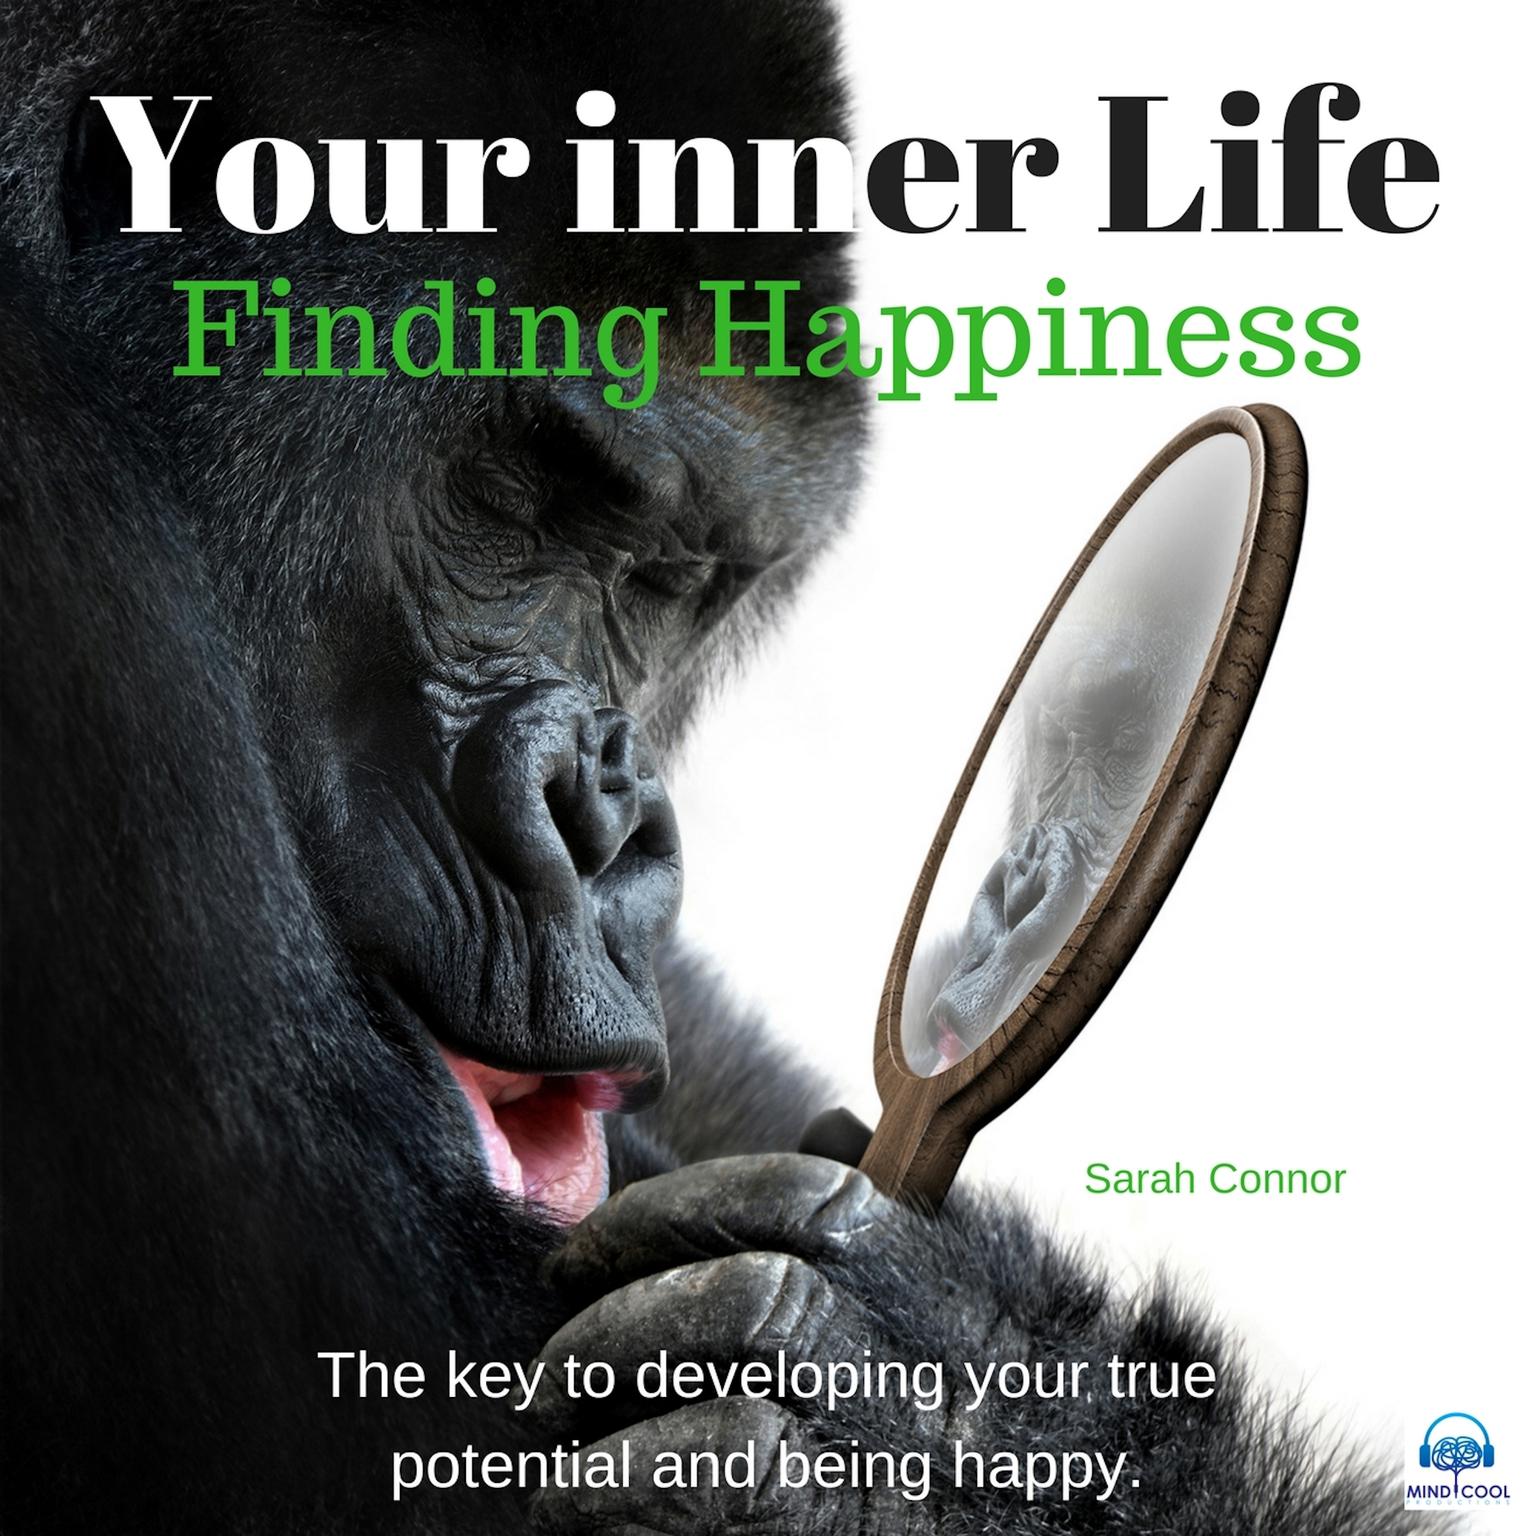 Your Inner Life: Finding Happiness. The key to developing your true potential and being happy Audiobook, by Sarah Connor